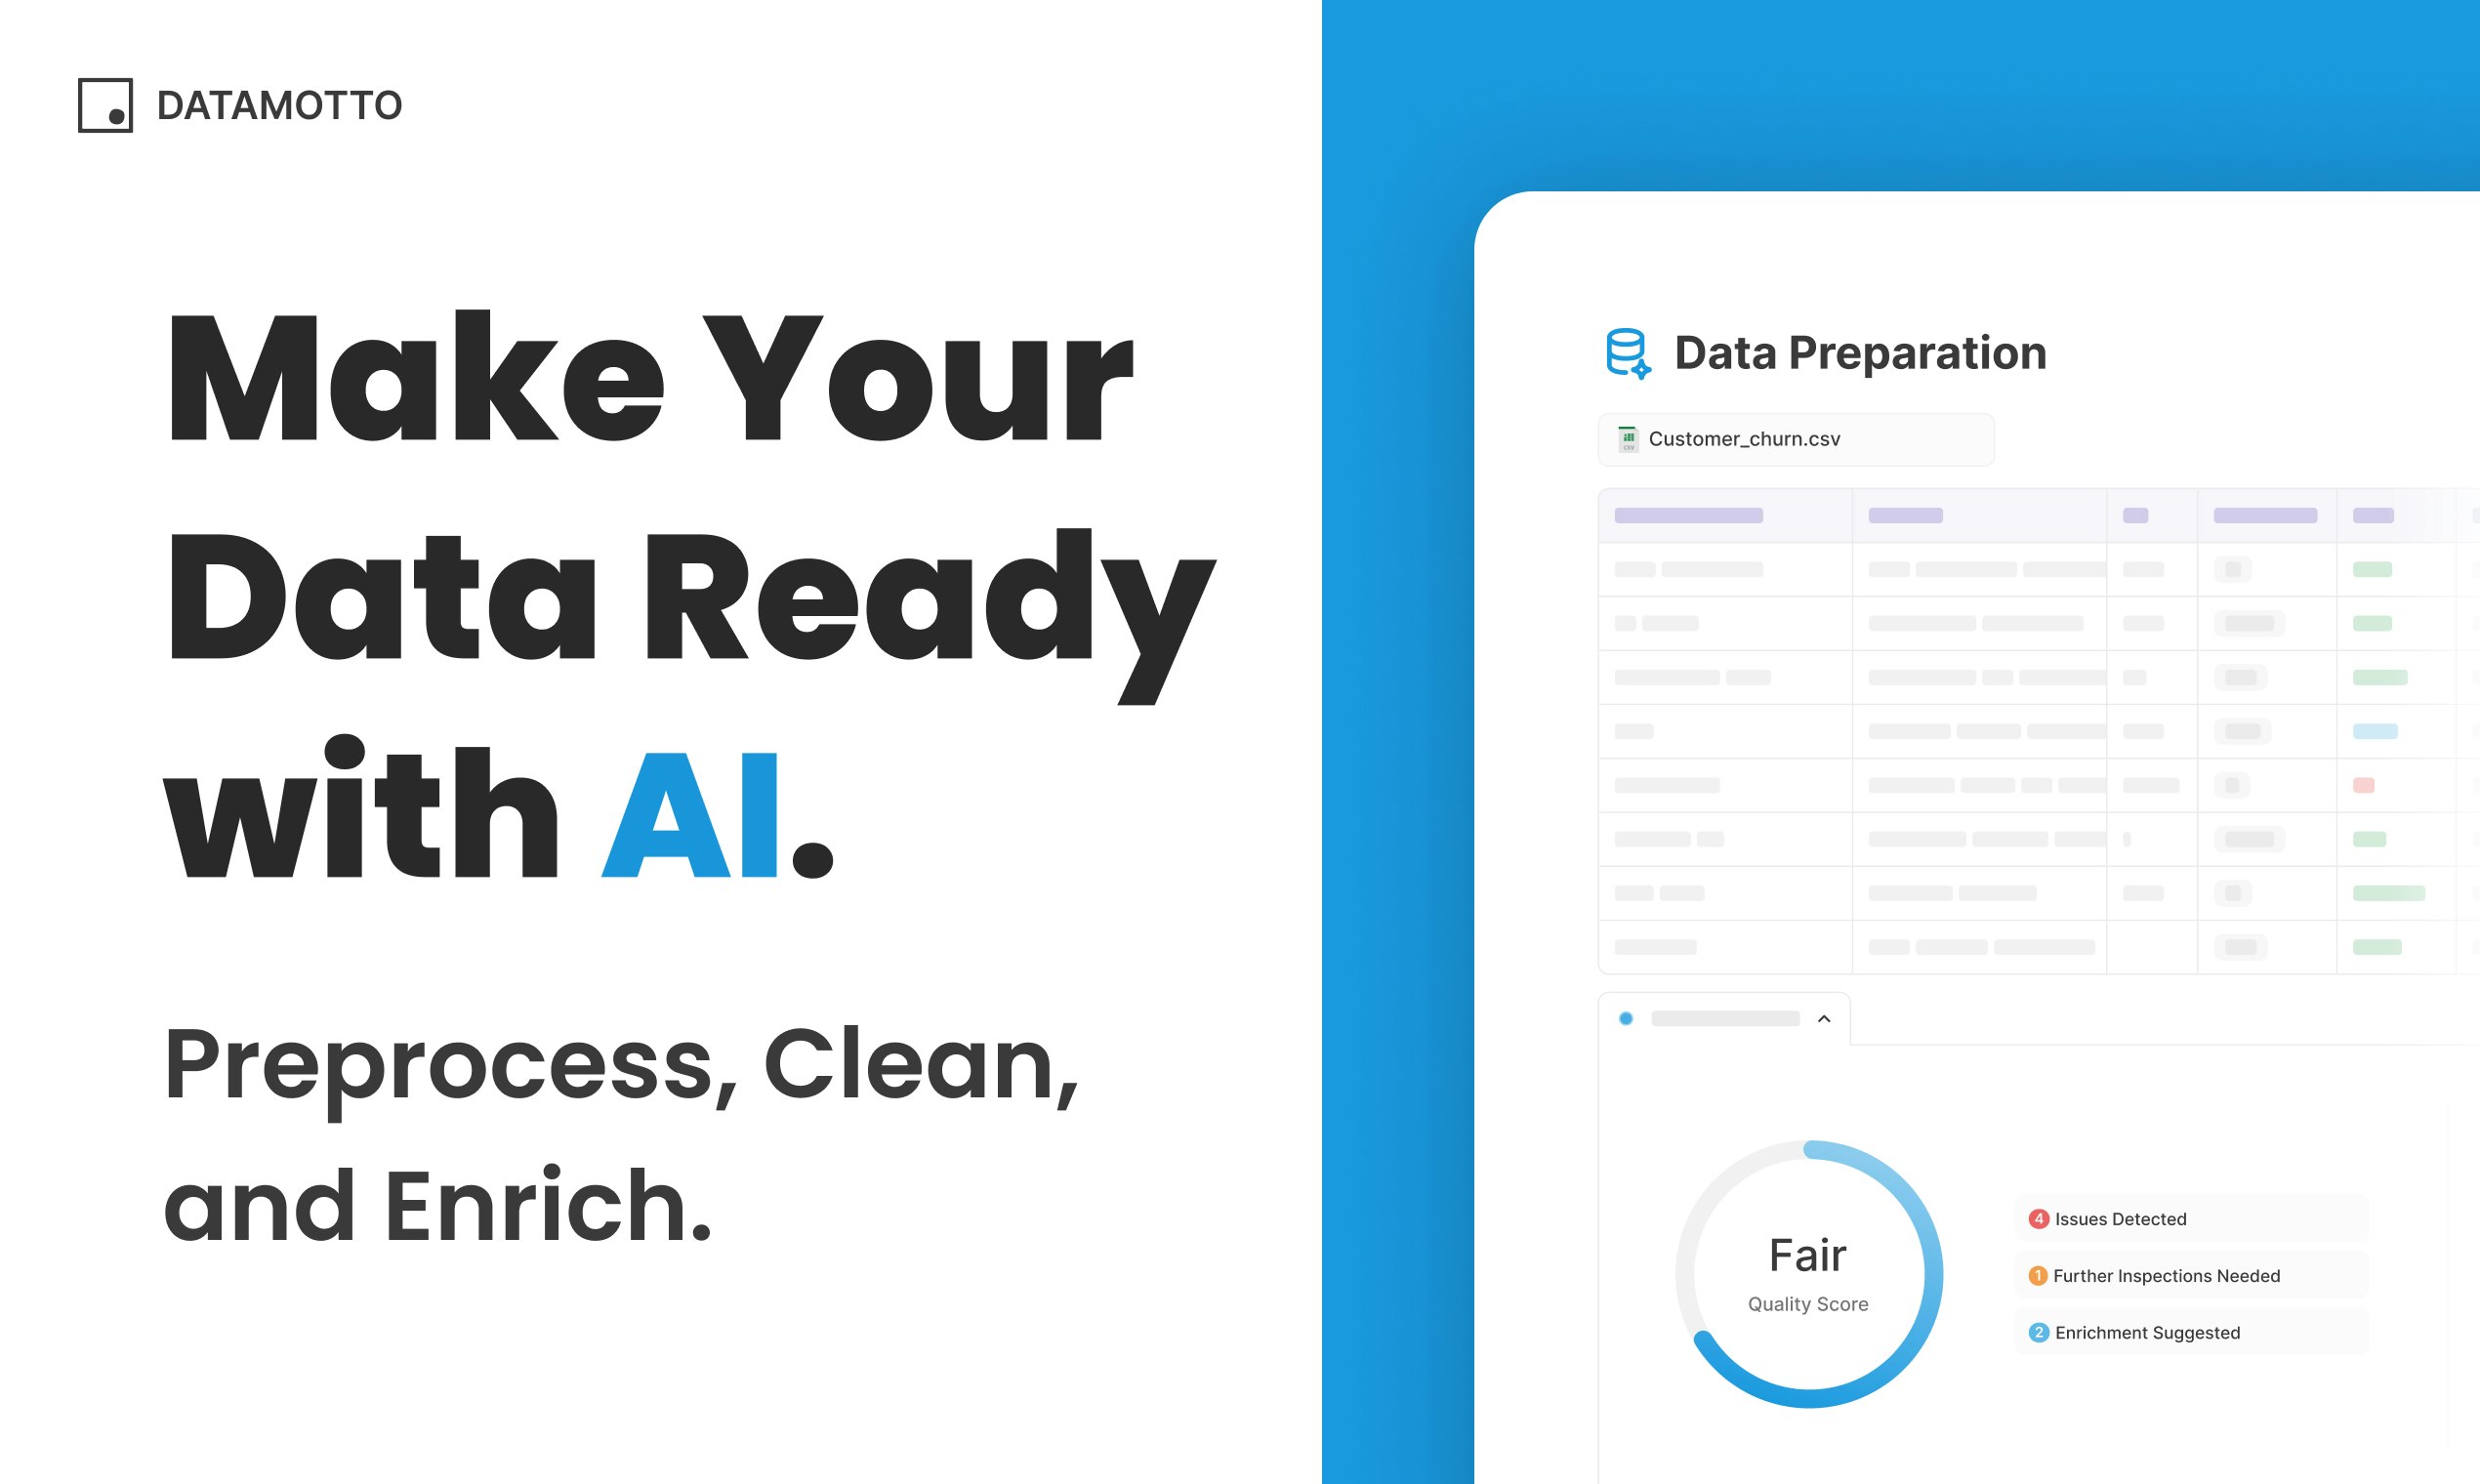 datamotto - Make your data ready and clean with AI